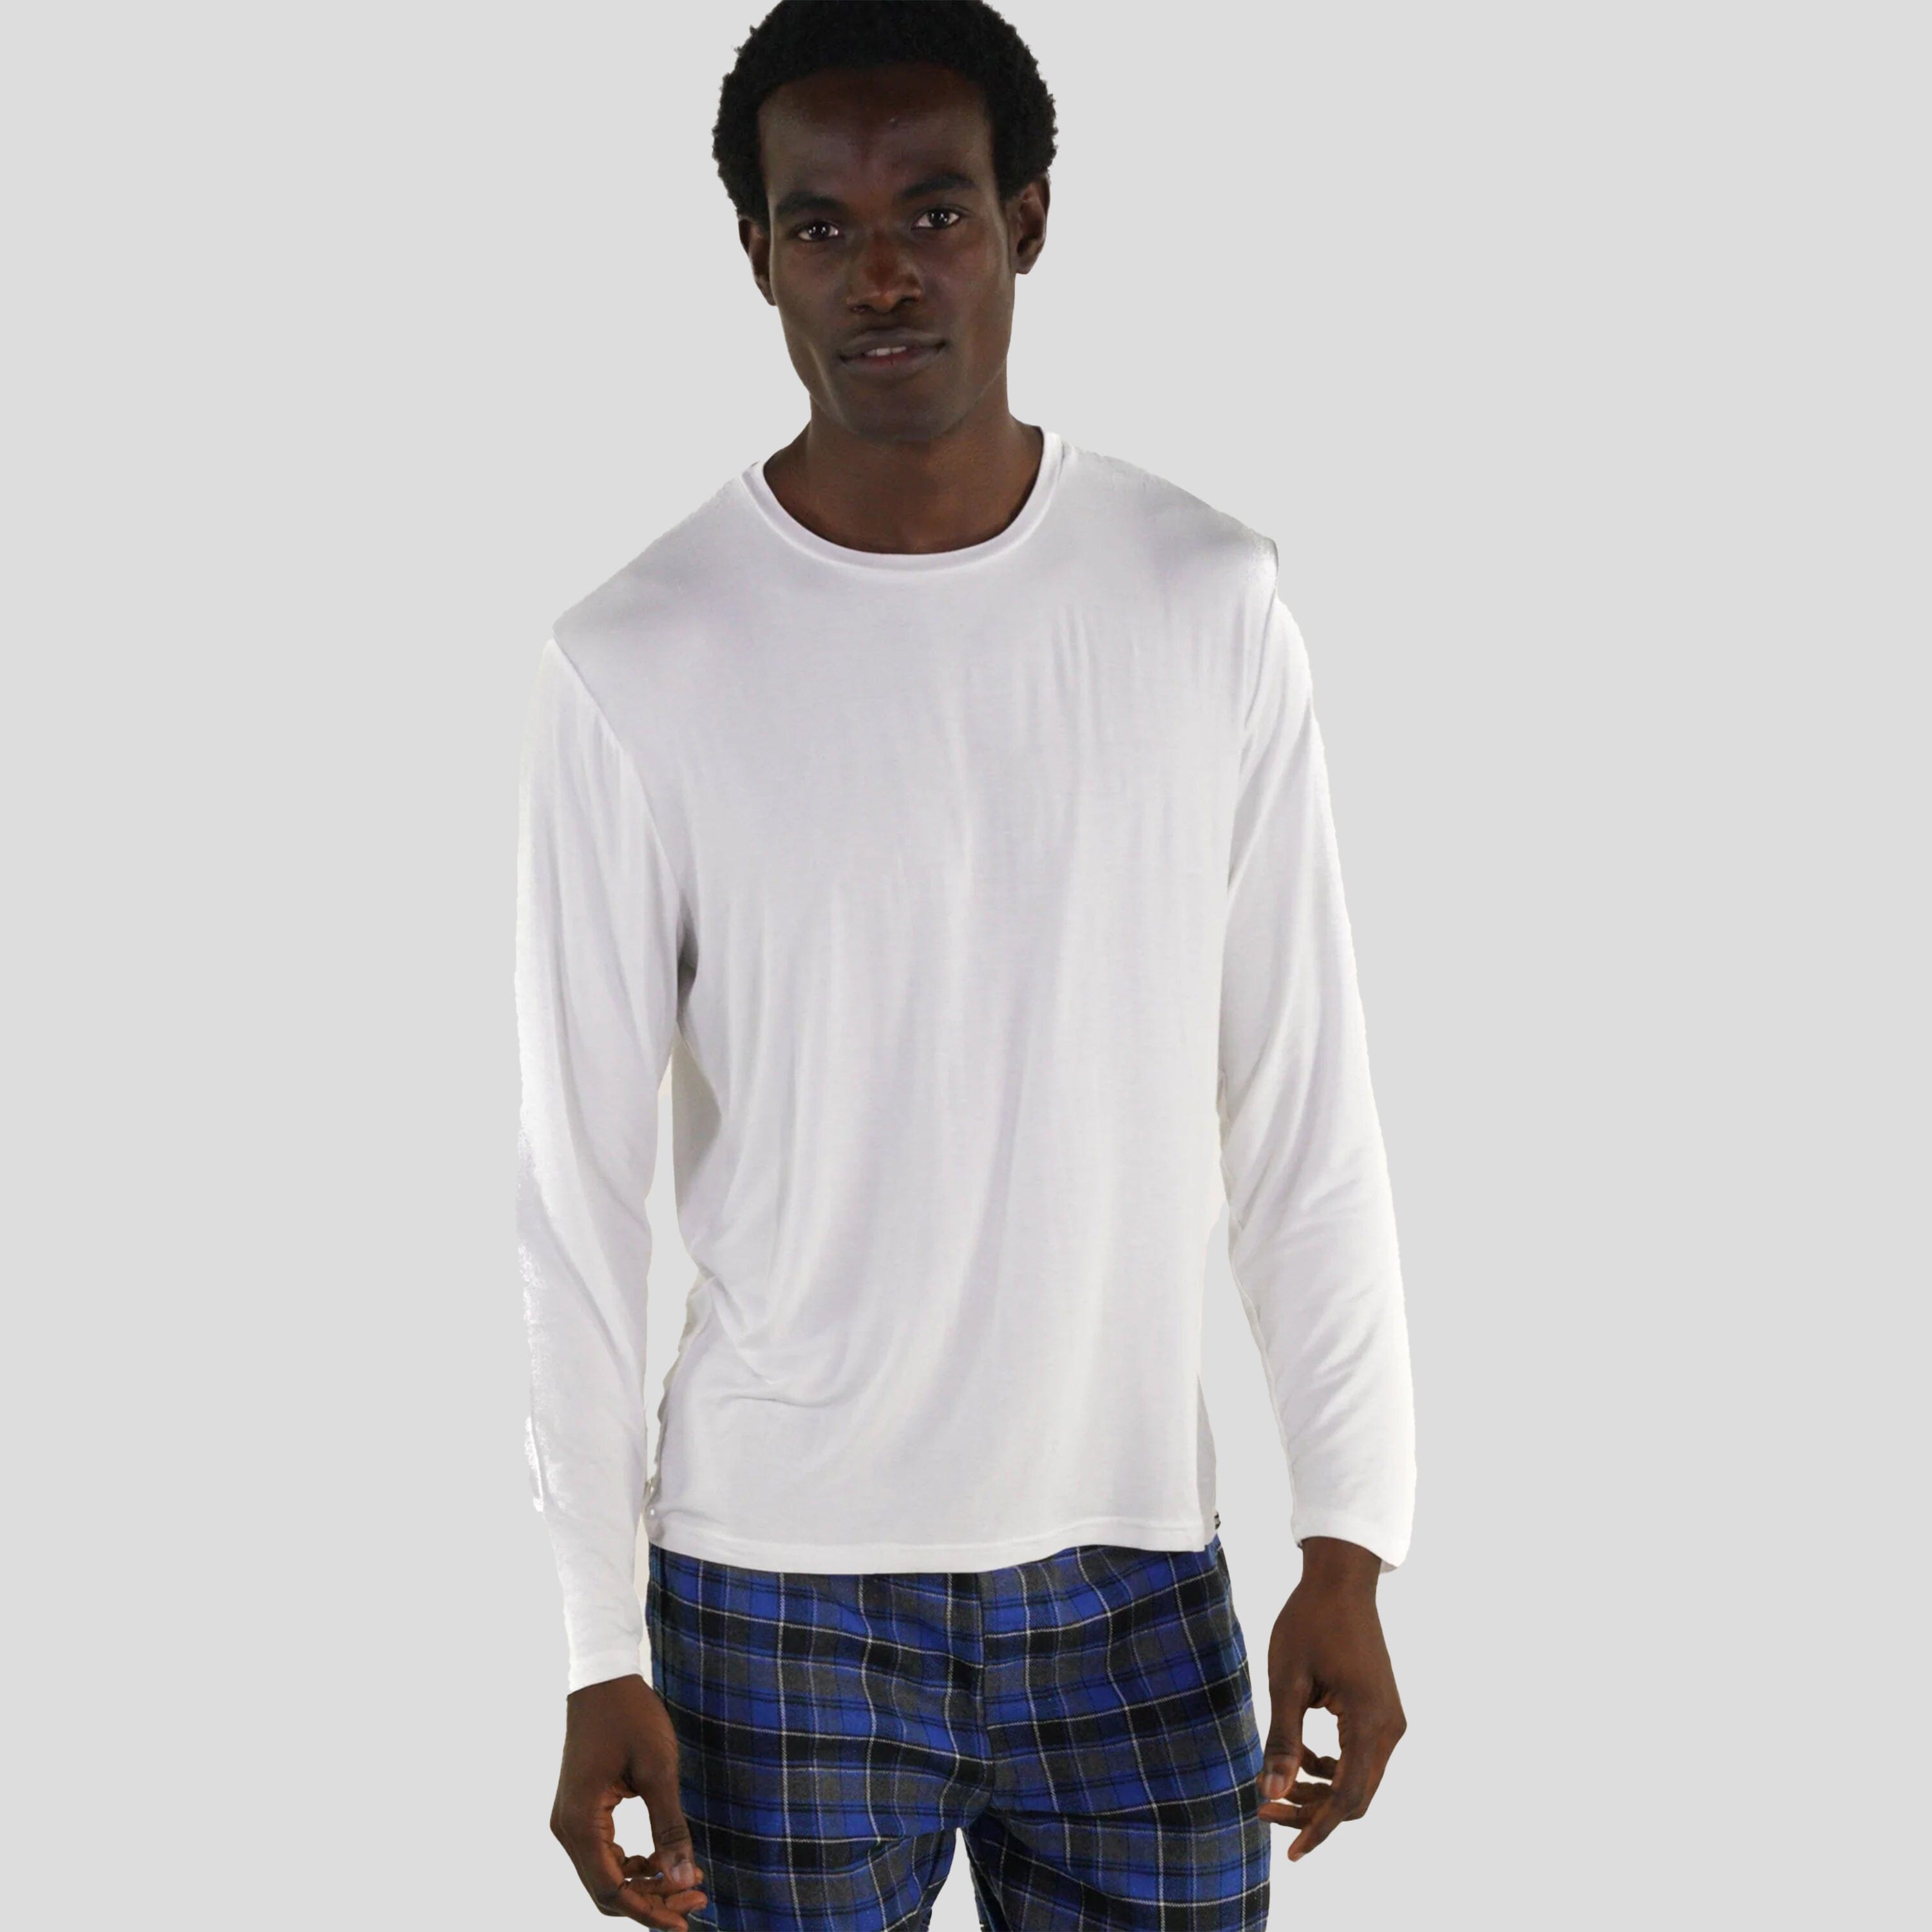 Bamboo Rayon White Knit Sleep Shirt For Men – Members Only®